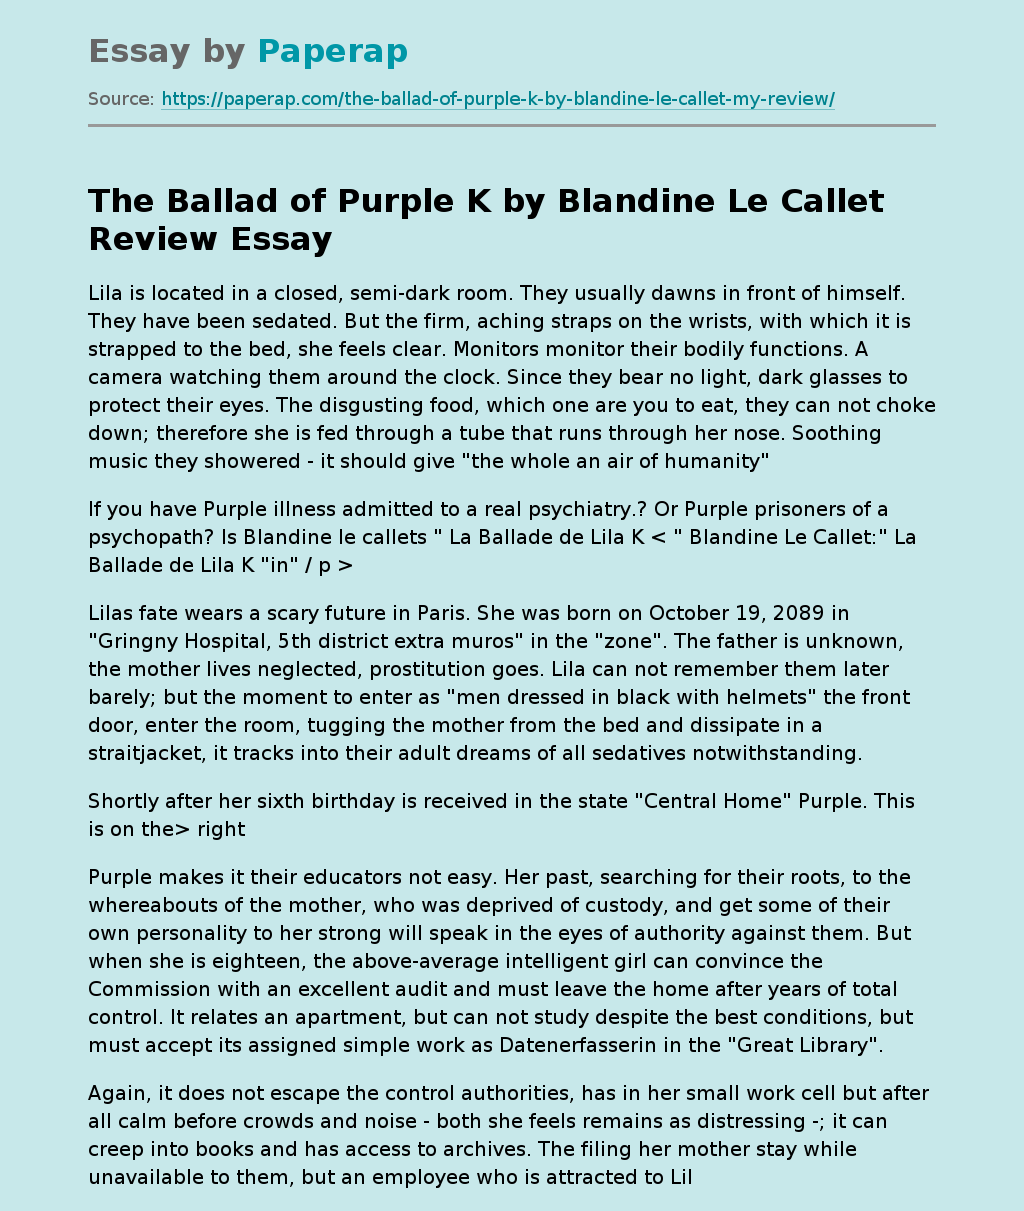 The Ballad of Purple K by Blandine Le Callet Review